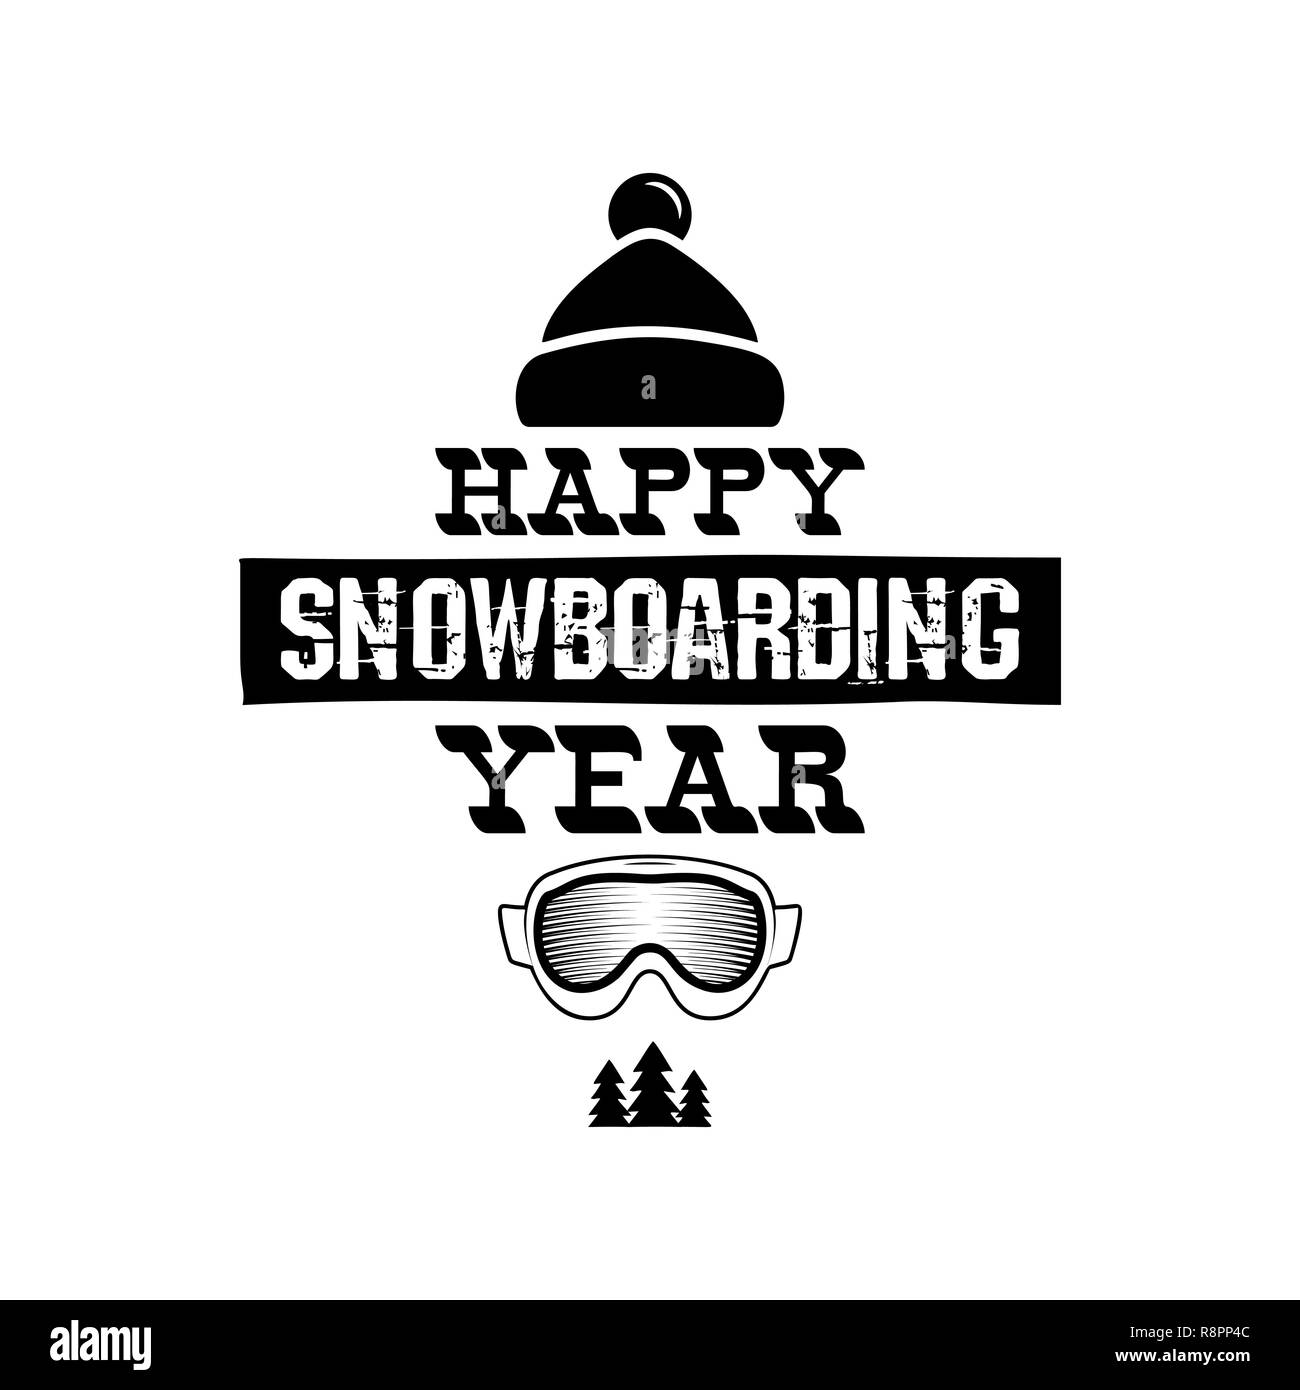 Happy Snowboarding Year - Snowboard tee graphic design, winter logo. For mountains adventurer, snowboarders, winter extreme sports fans. For t-shirt, mug other prints. Stock vector isolated Stock Vector